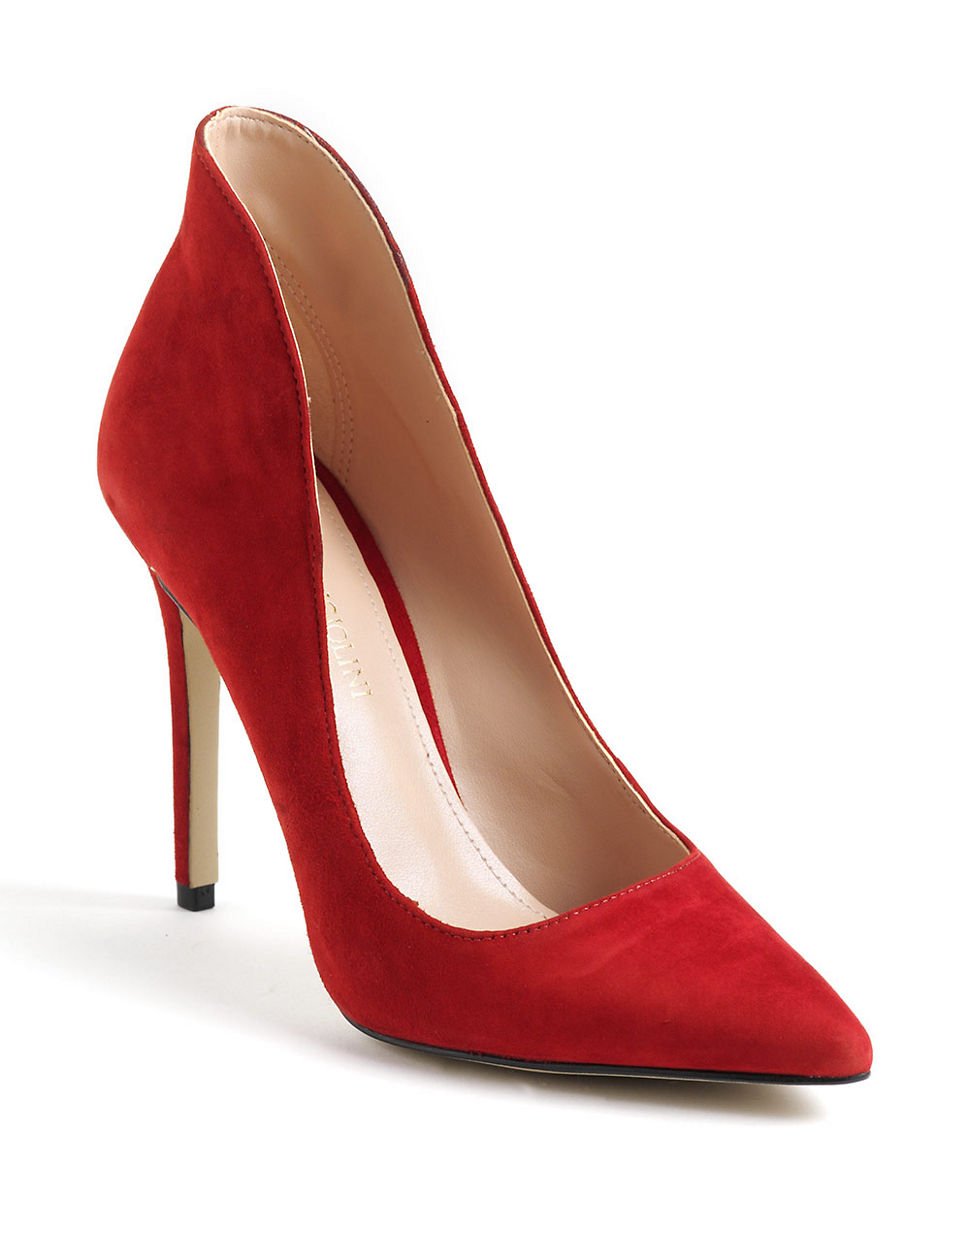 Enzo Angiolini Fayson Suede Pumps in Red | Lyst